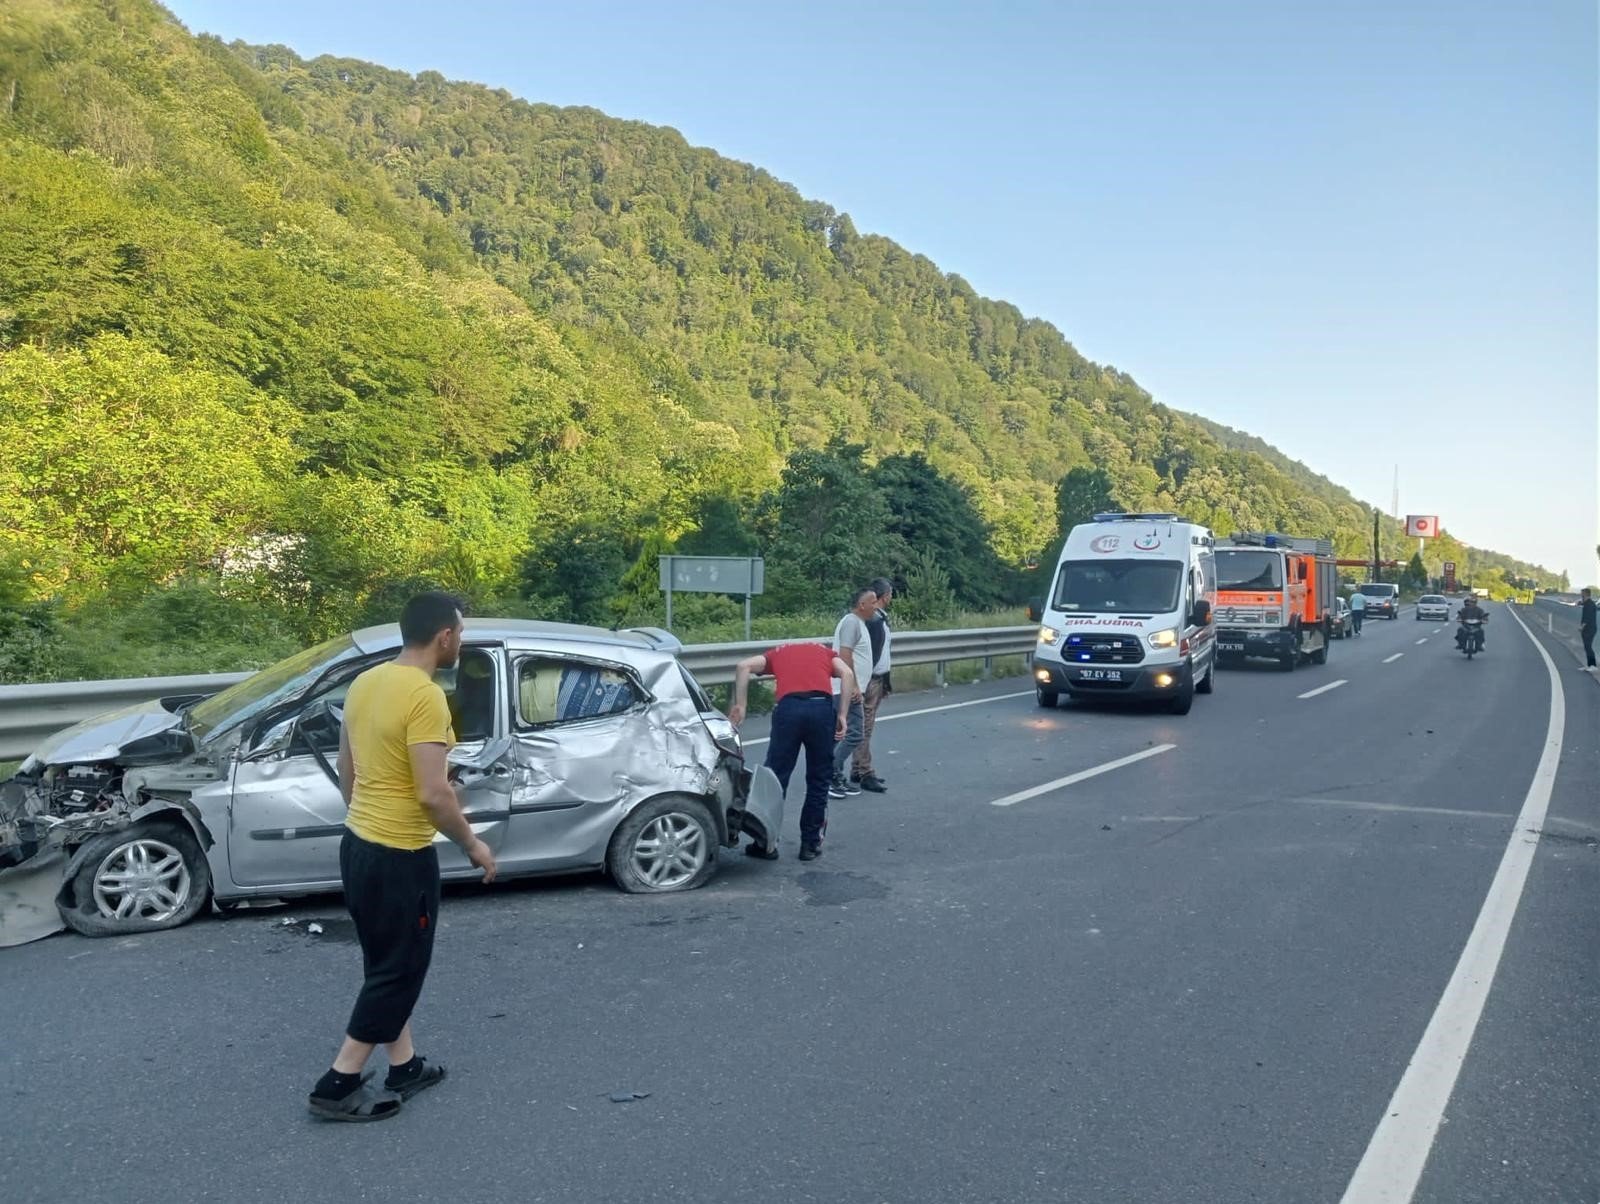 A front view of a crashed car after the traffic accident in Zonguldak, northern Türkiye, June 28, 2023. (IHA Photo)